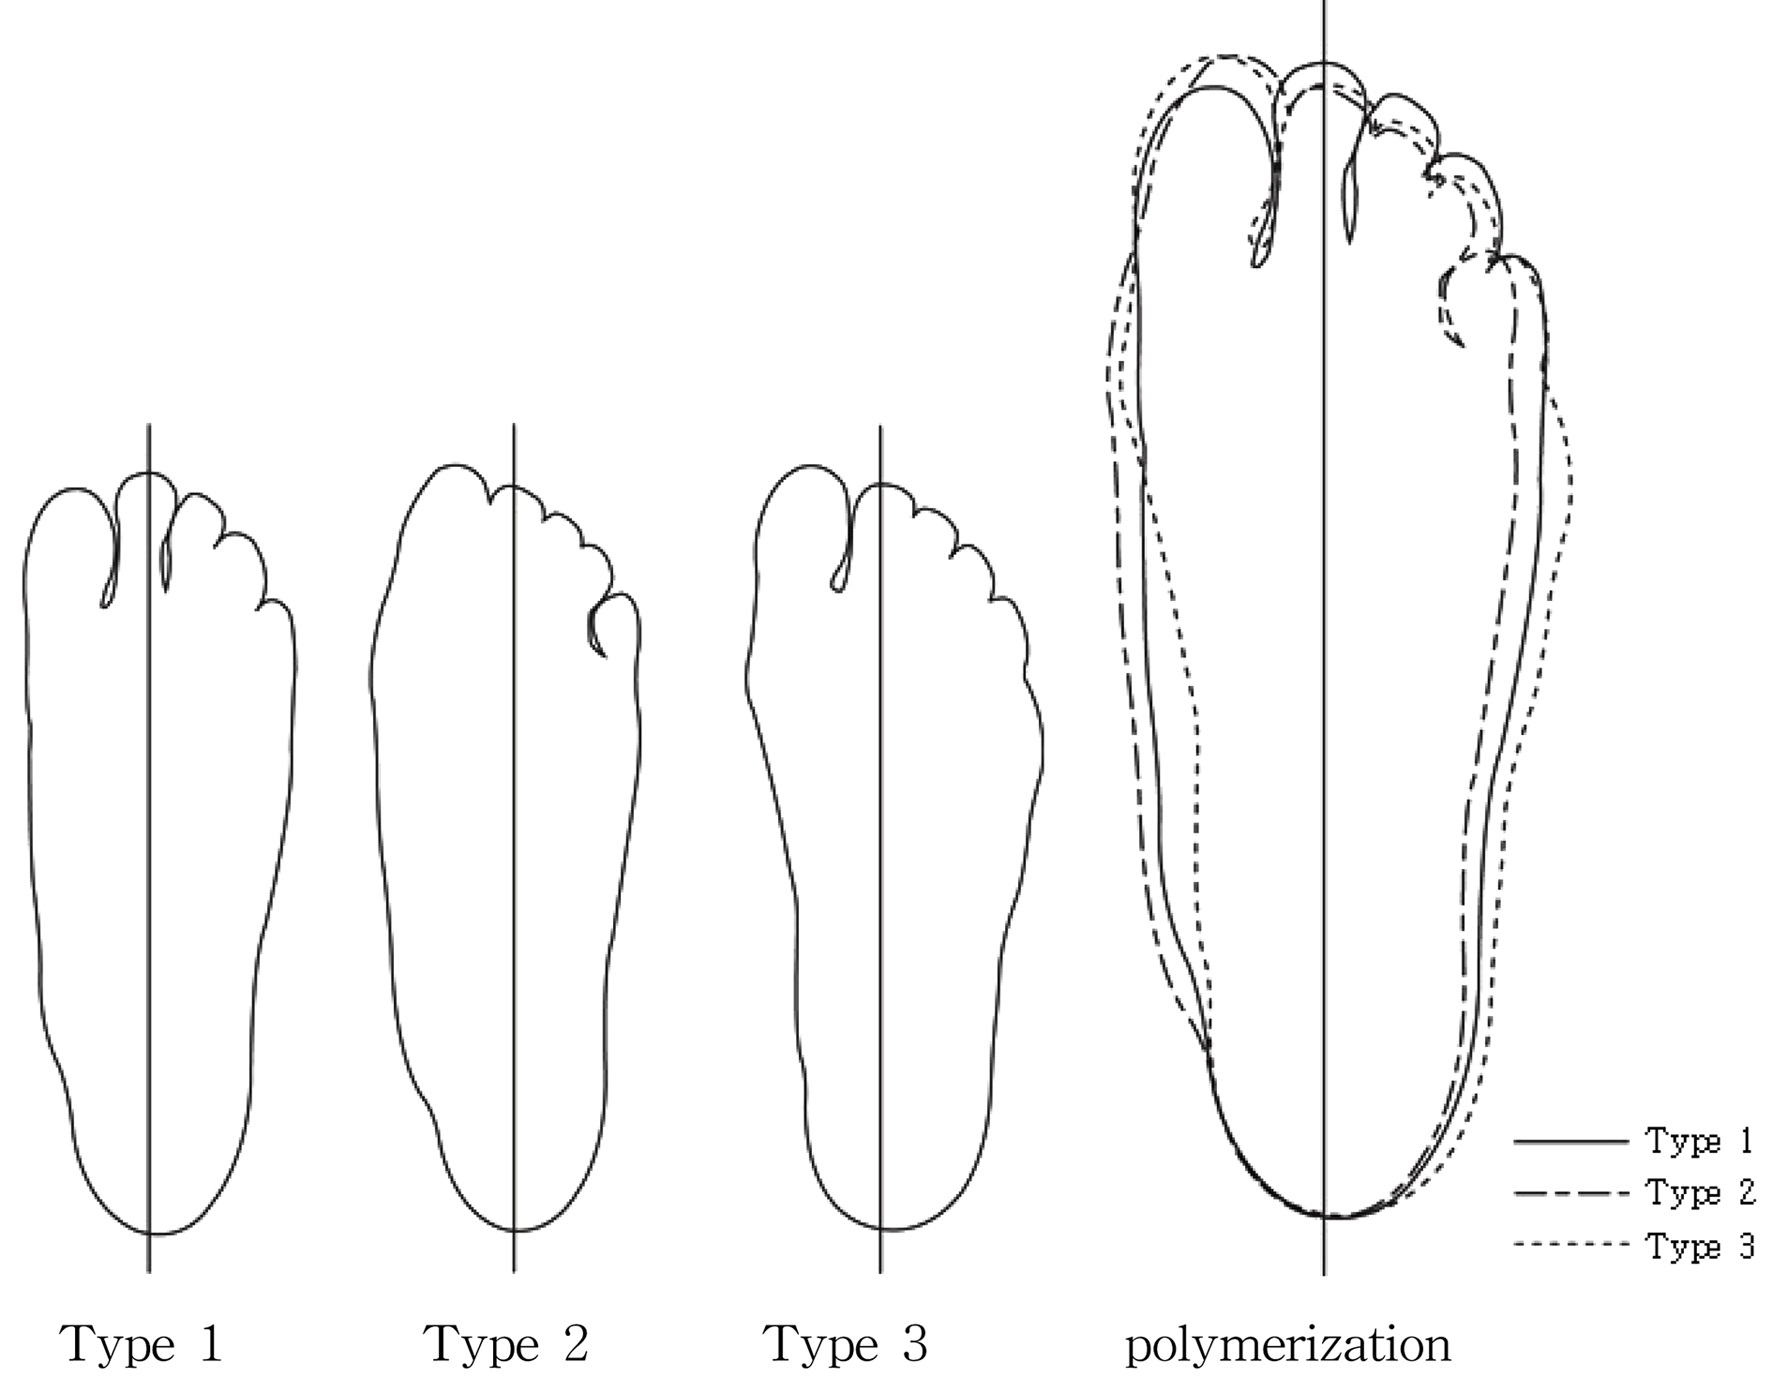 The representative silhouette by the sole types.